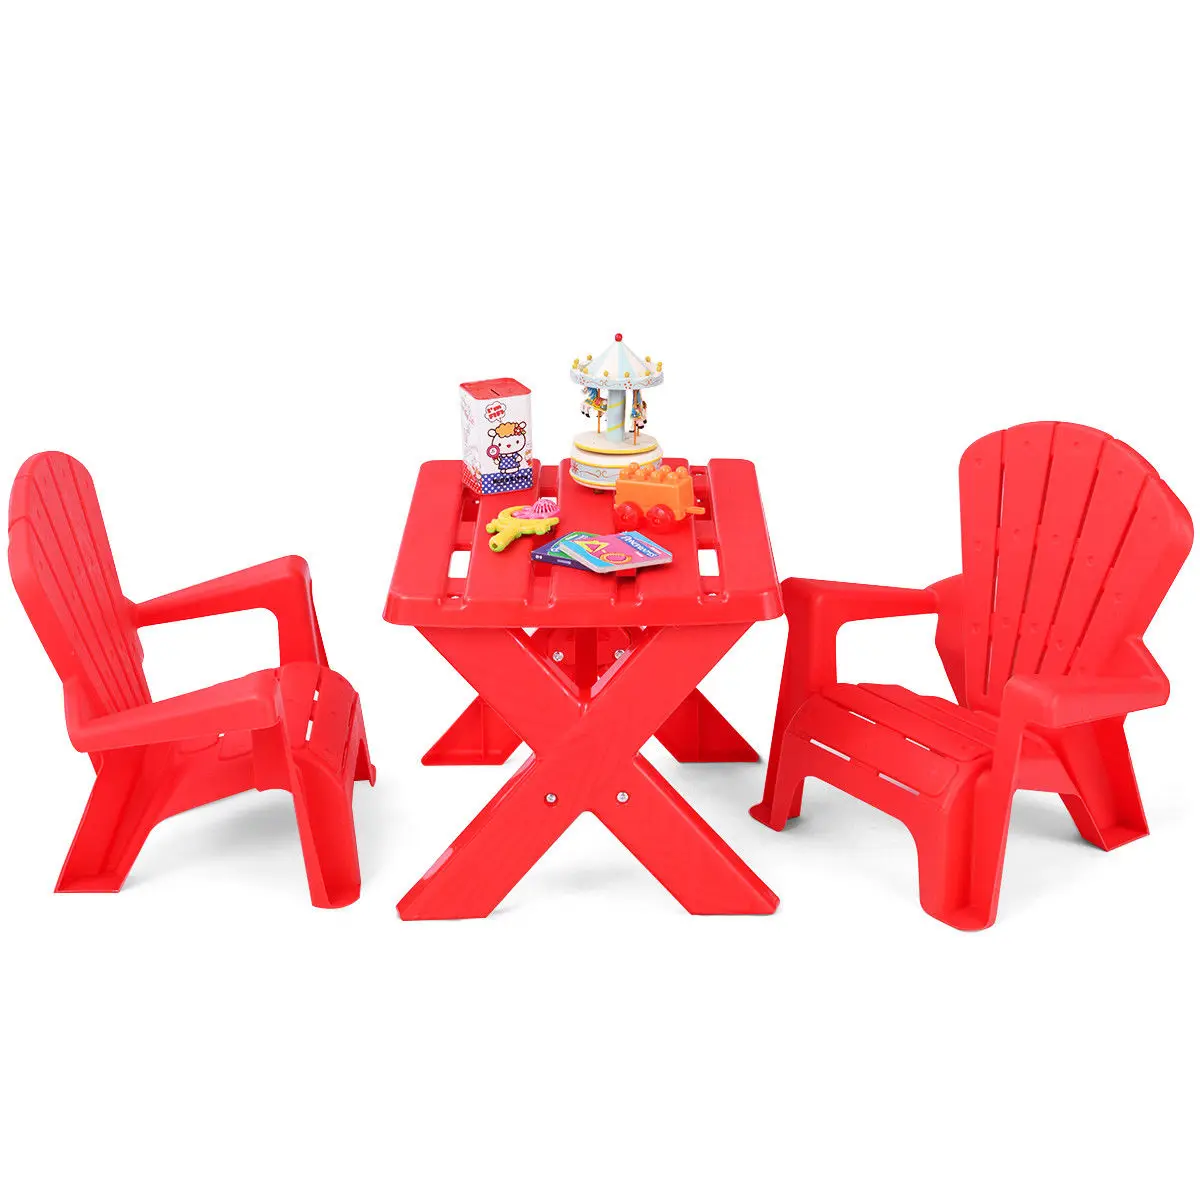 Plastic children kids table chair set 3 piece play furniture in outdoor red thumb200